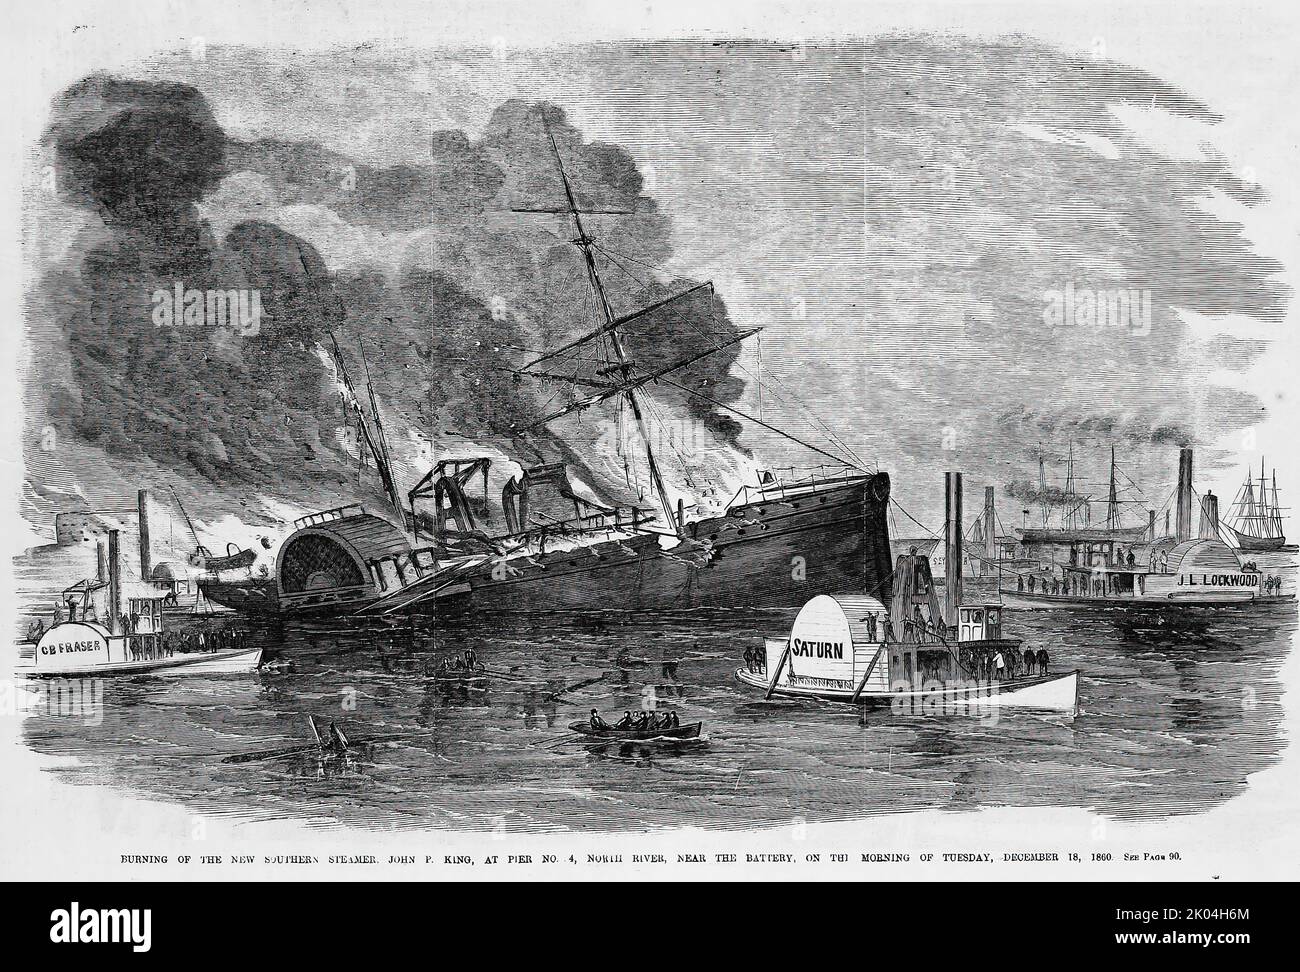 Burning of the new southern steamer John P. King, at Pier No. 4, North River (Hudson River), New York, near the battery, on December 18th, 1860. 19th century illustration from Frank Leslie's Illustrated Newspaper Stock Photo